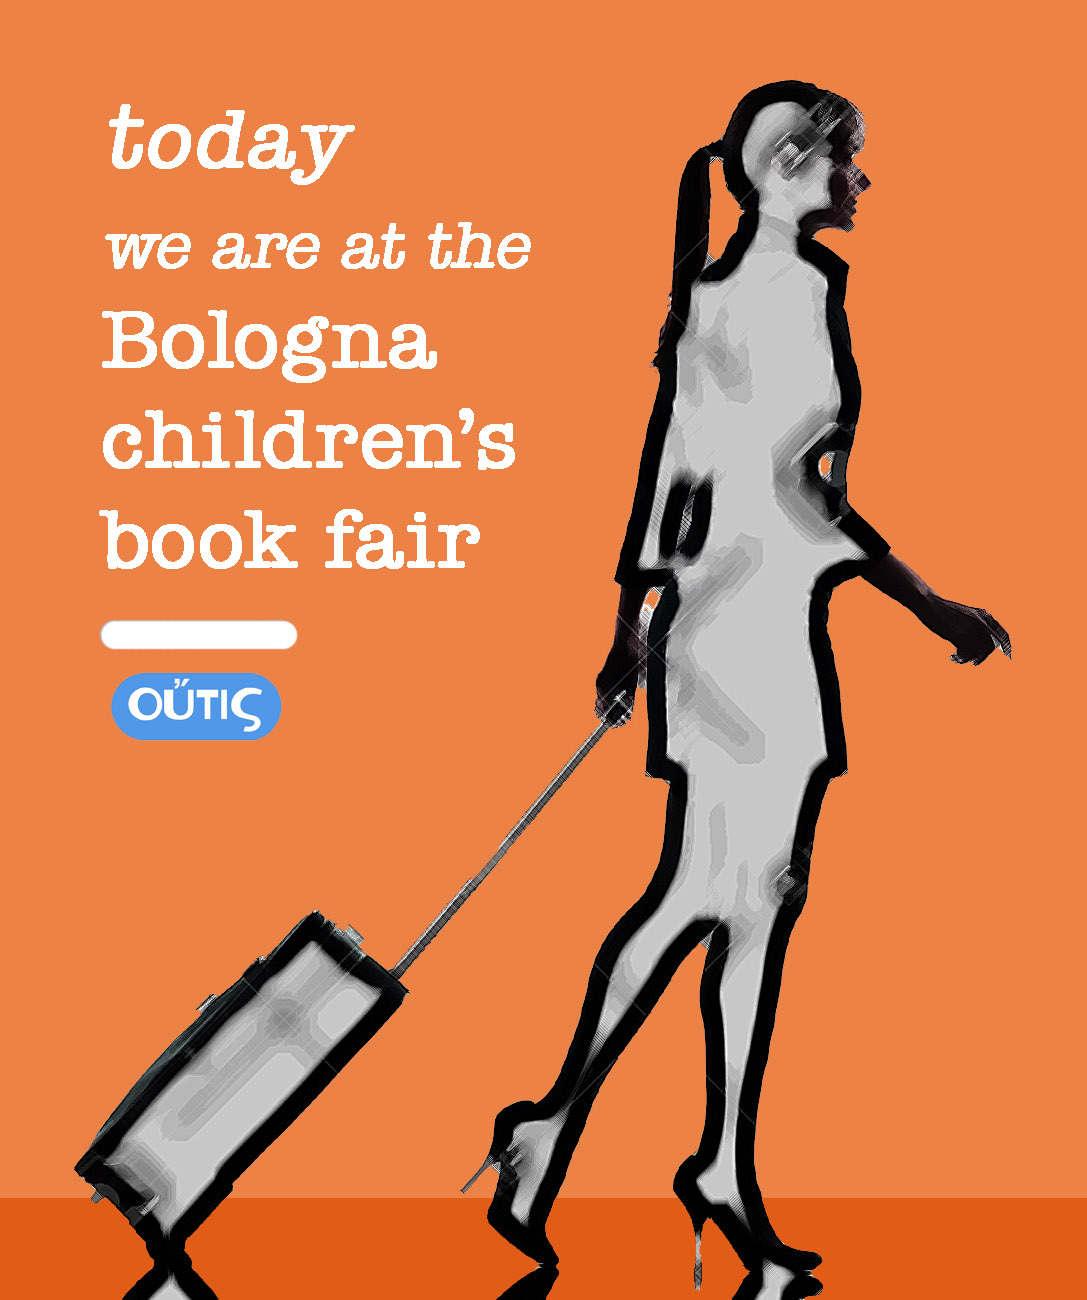 Today we are at the Bologna children’s book fair